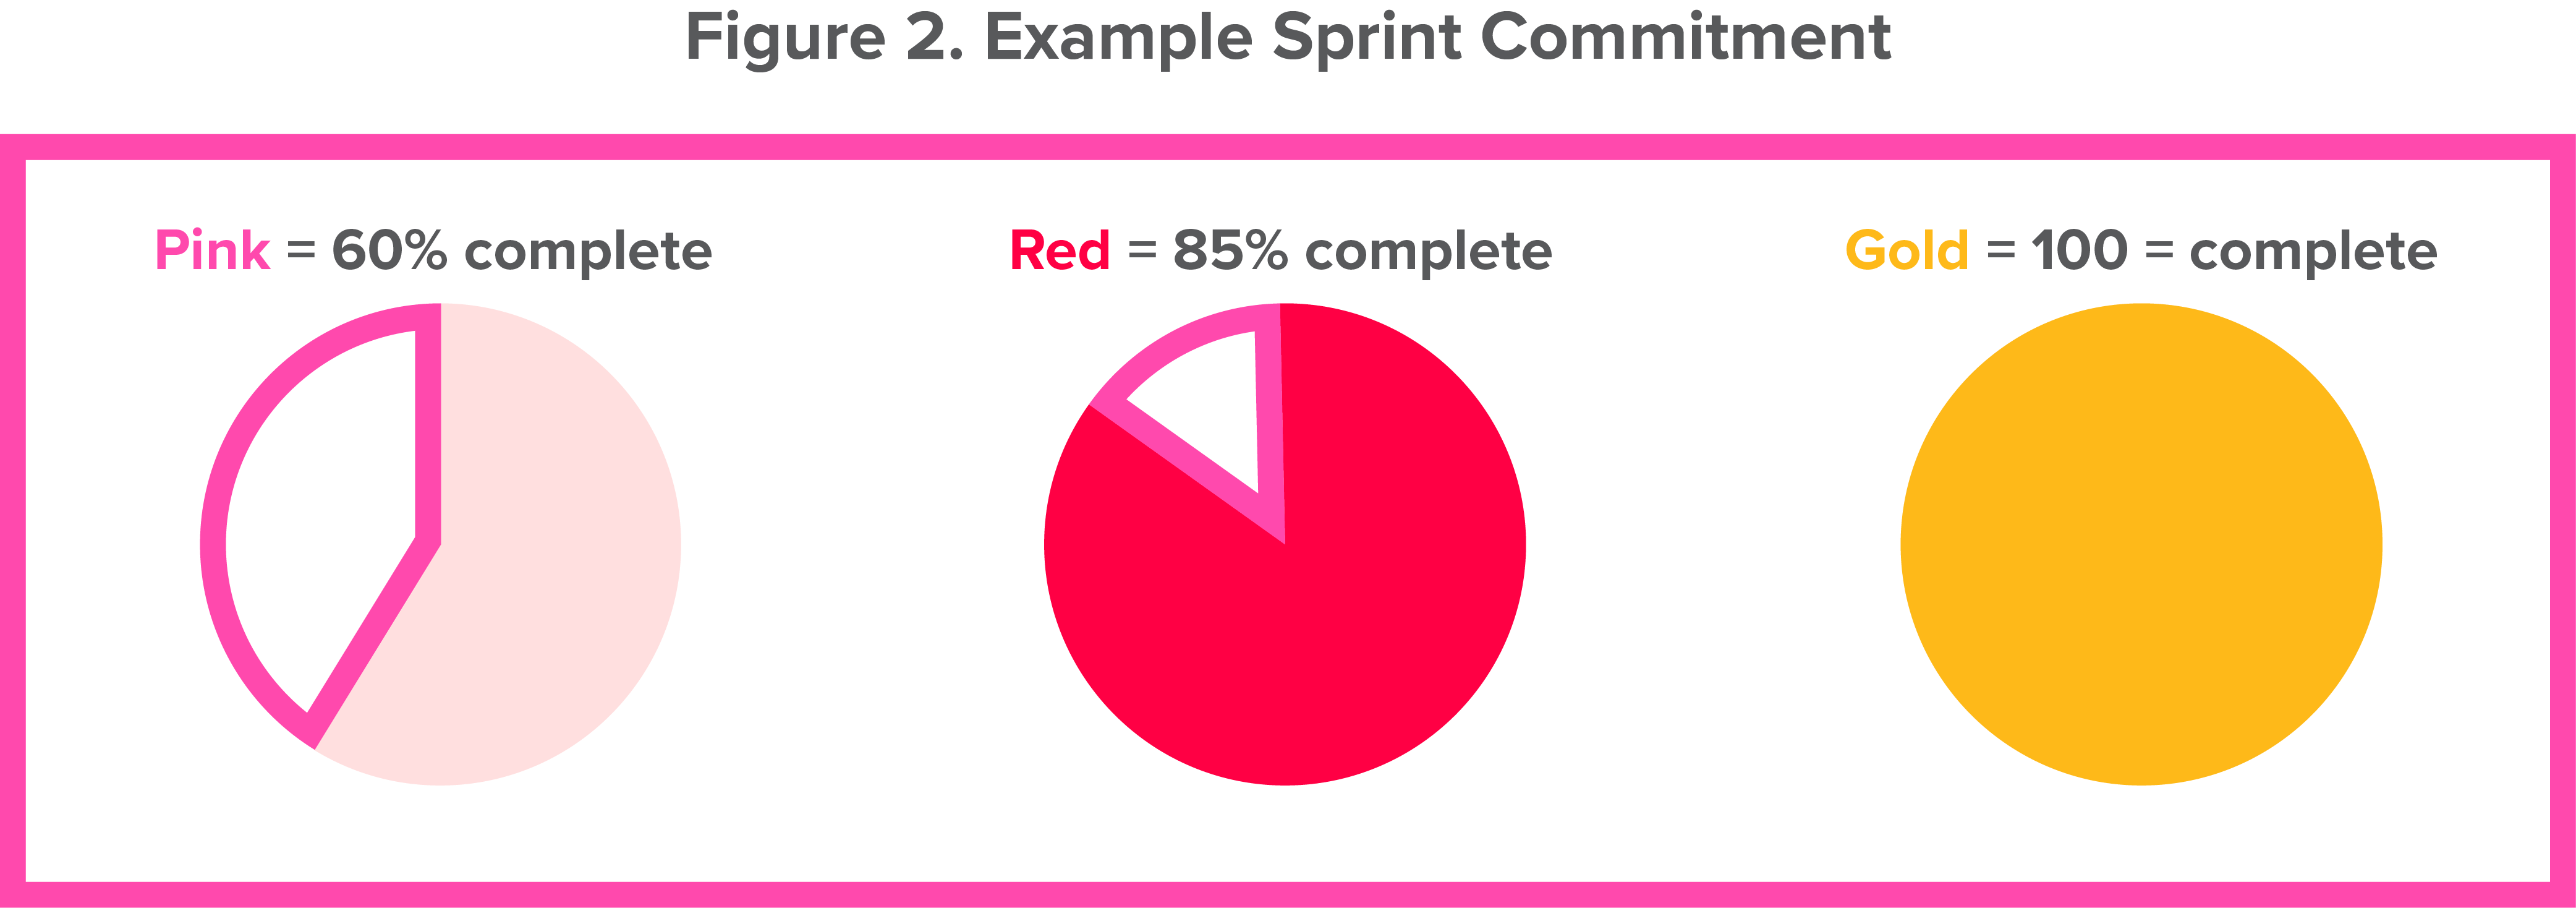 Fig 2_Example Sprint Commitment